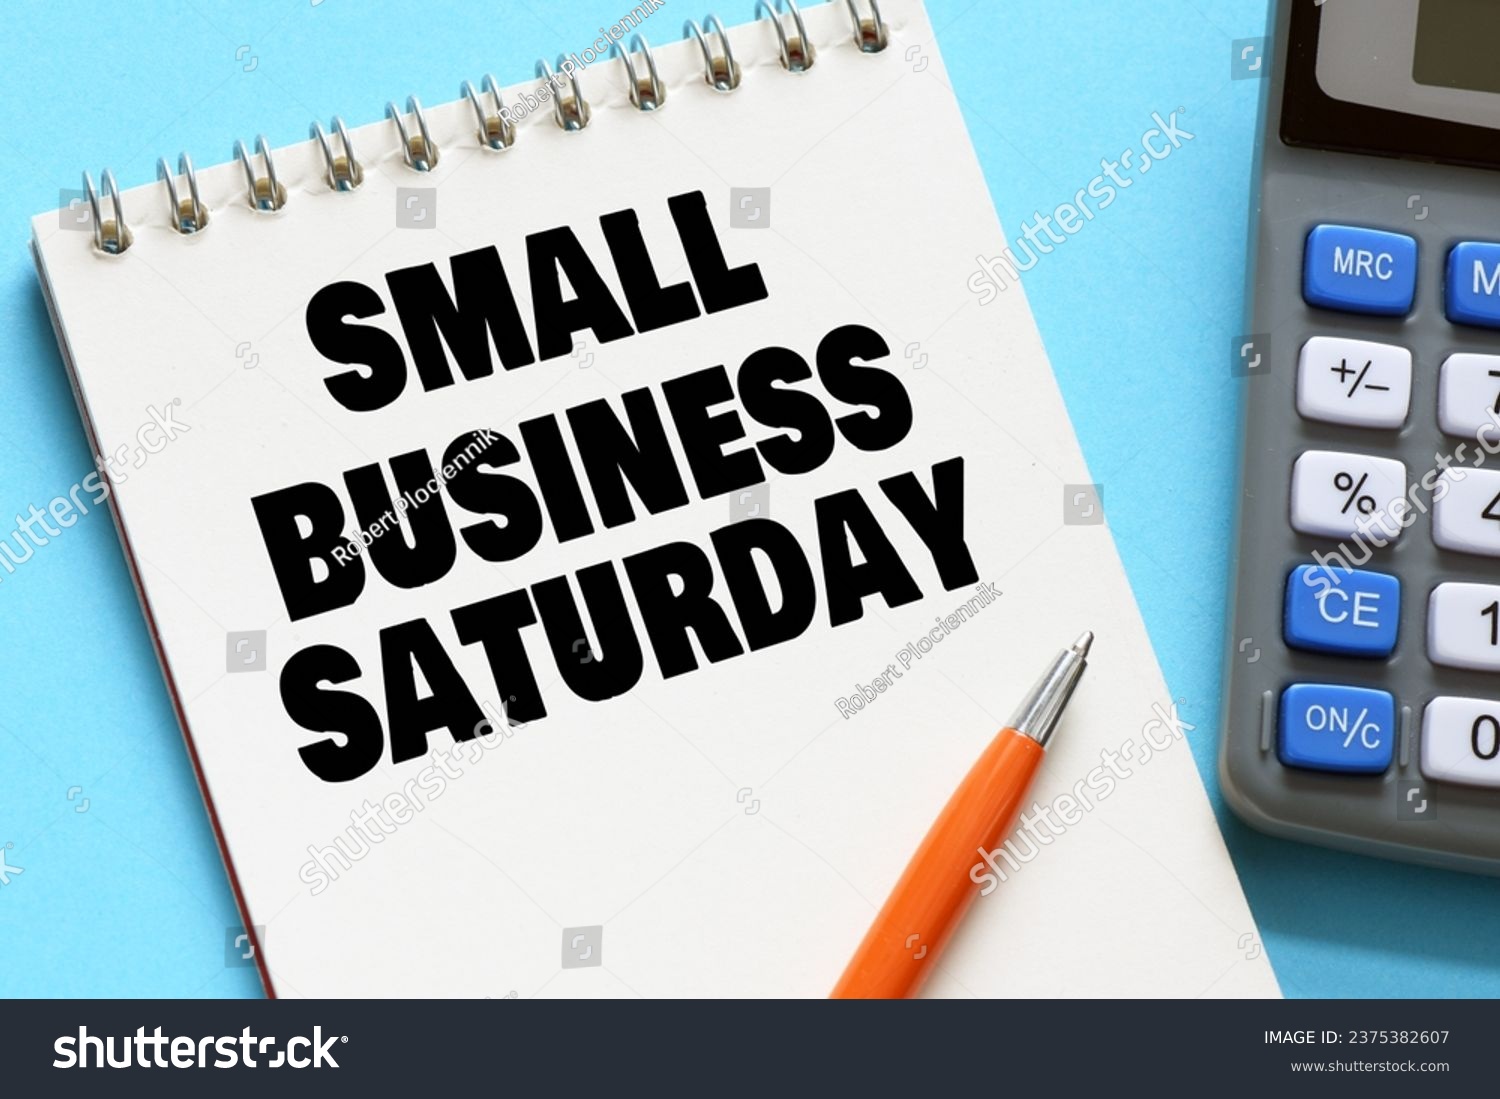 Small Business Saturday words in an office notebook. Concept for business. #2375382607